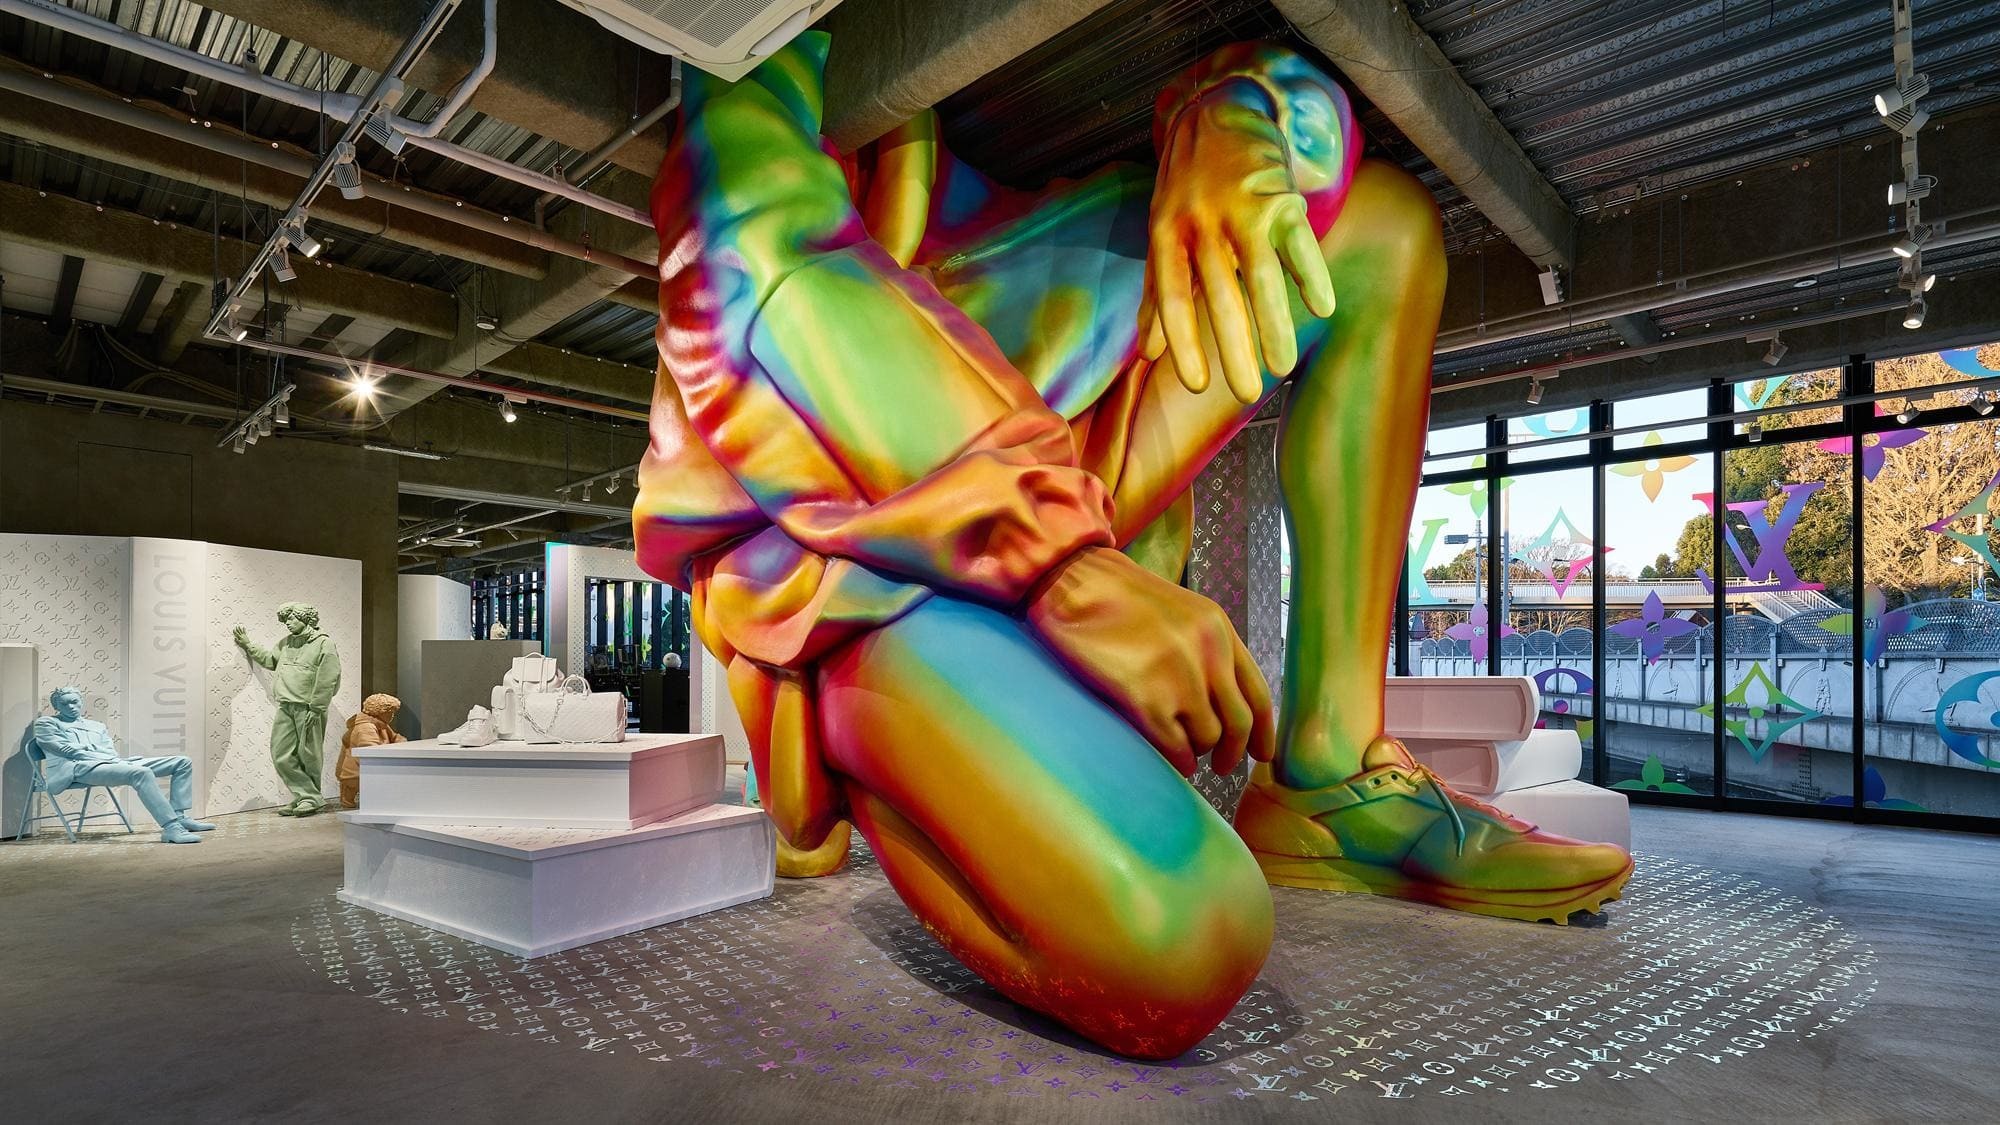 virgil abloh unveils 12-story technicolor sculpture in NYC for